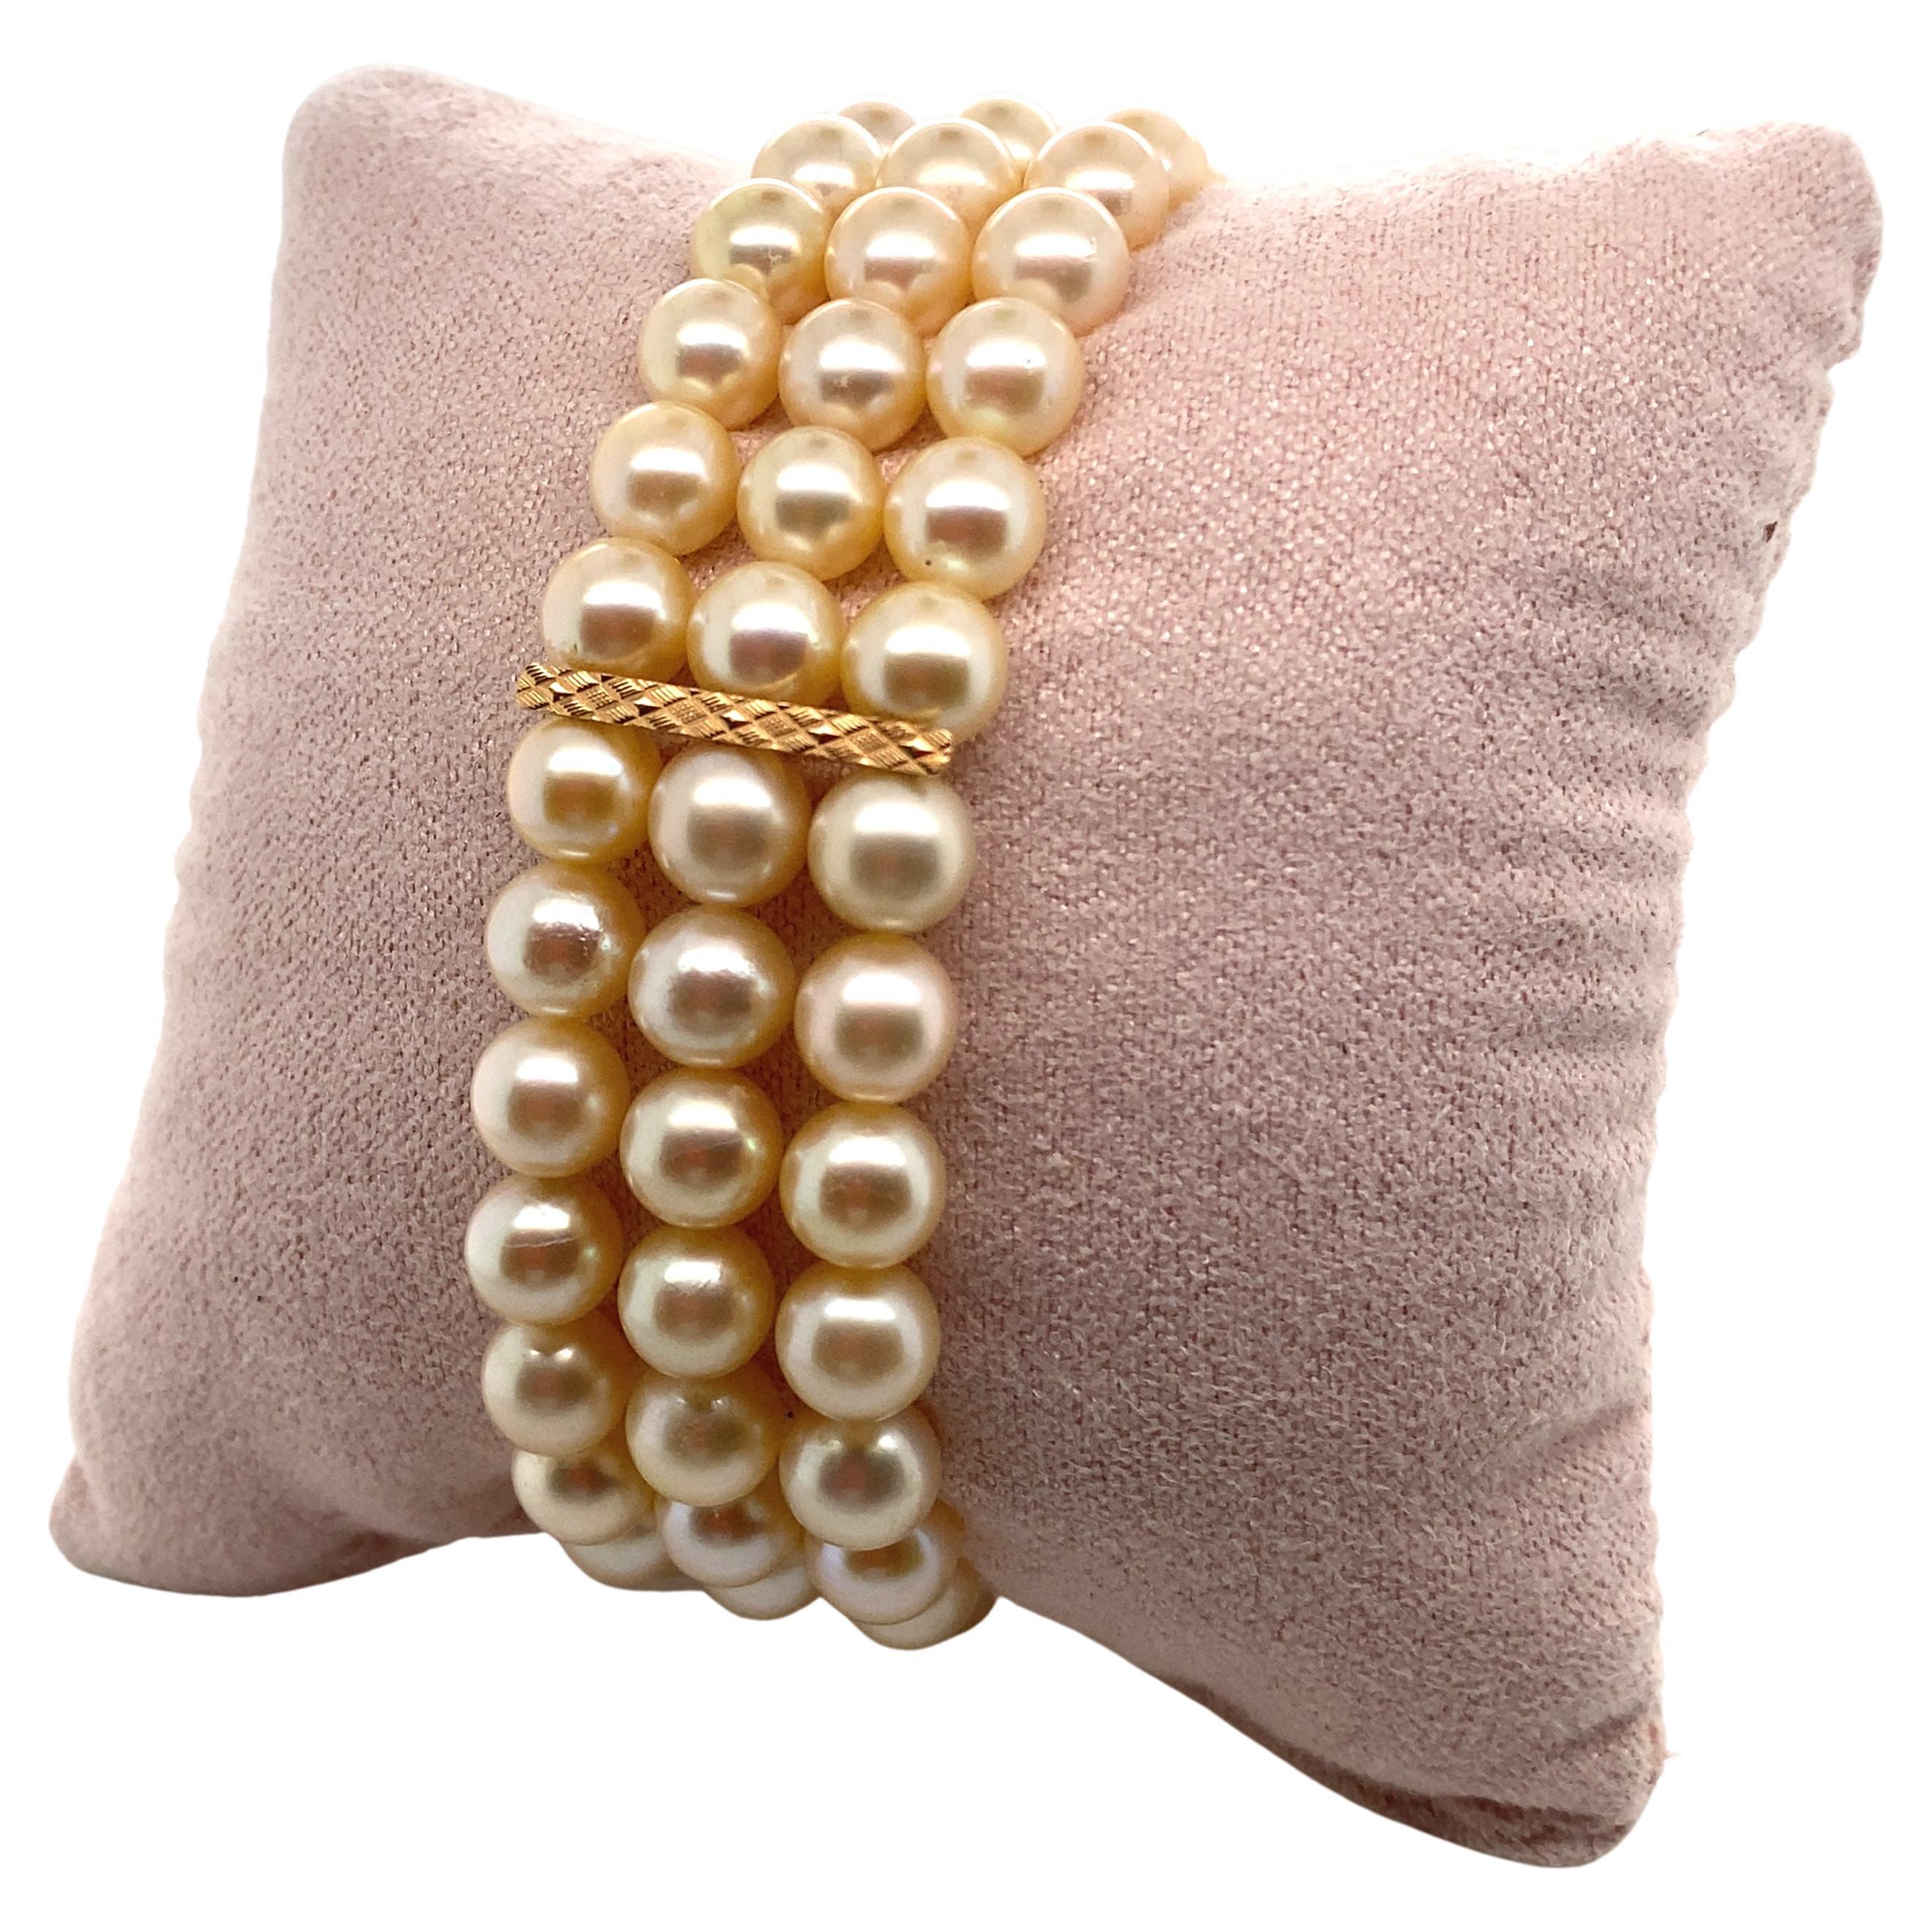 Pearl Bracelet Vintage with 18 Carat Barrettes Gold.
French Pearl Bracelet Vintage with 26x3 which weight 6 1/Z.
The pearls were strung not long ago.

Weight: 36.5 grams 
Width: 2 cm /  0.787402 inch
Lenght: 18.5 cm / 7.28 inch

Our gold gemstone